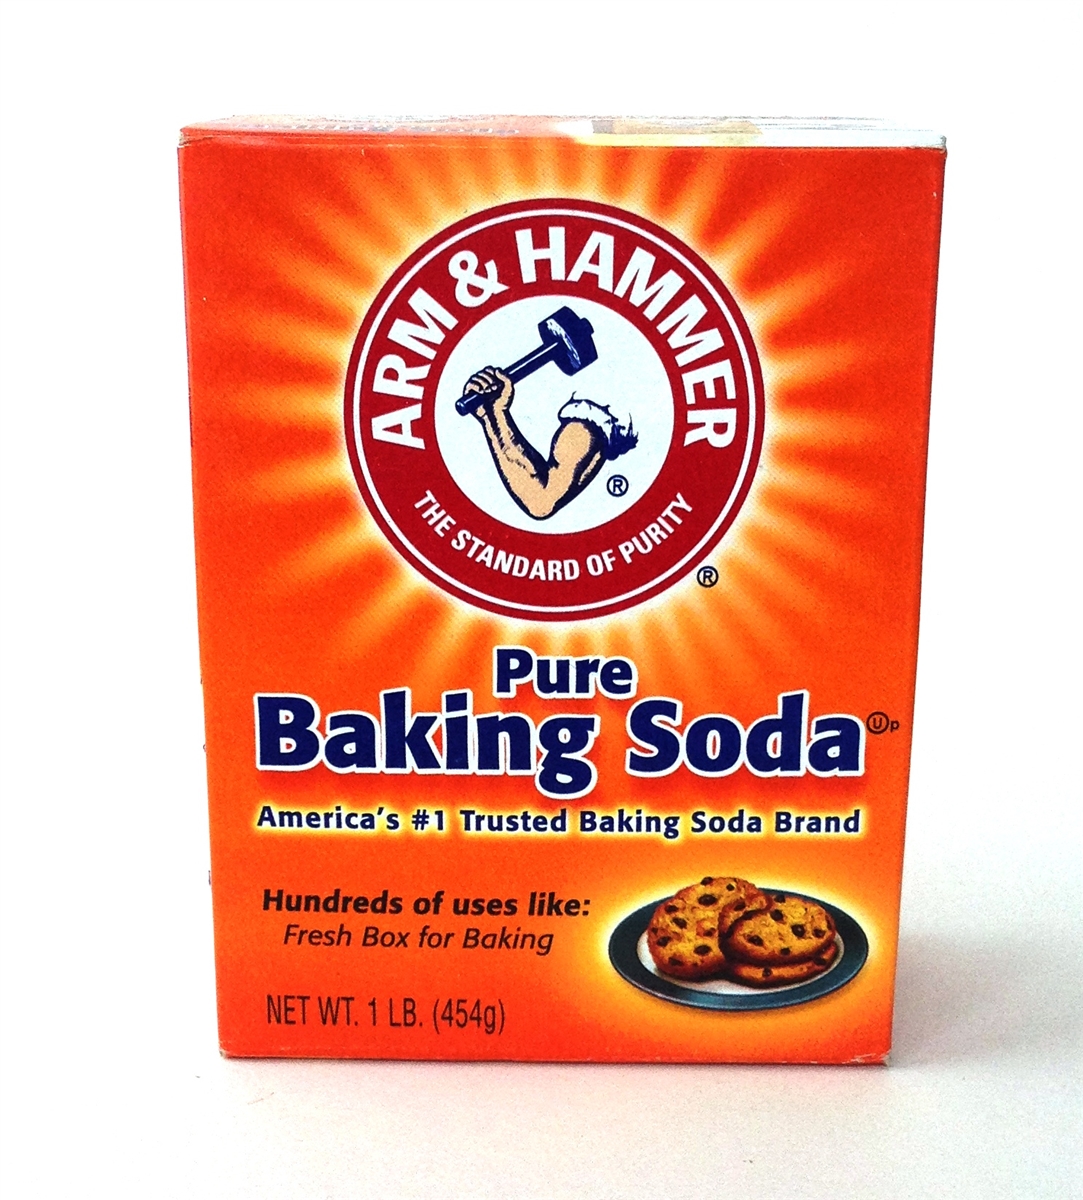 Baking soda is great for tough cleaning jobs